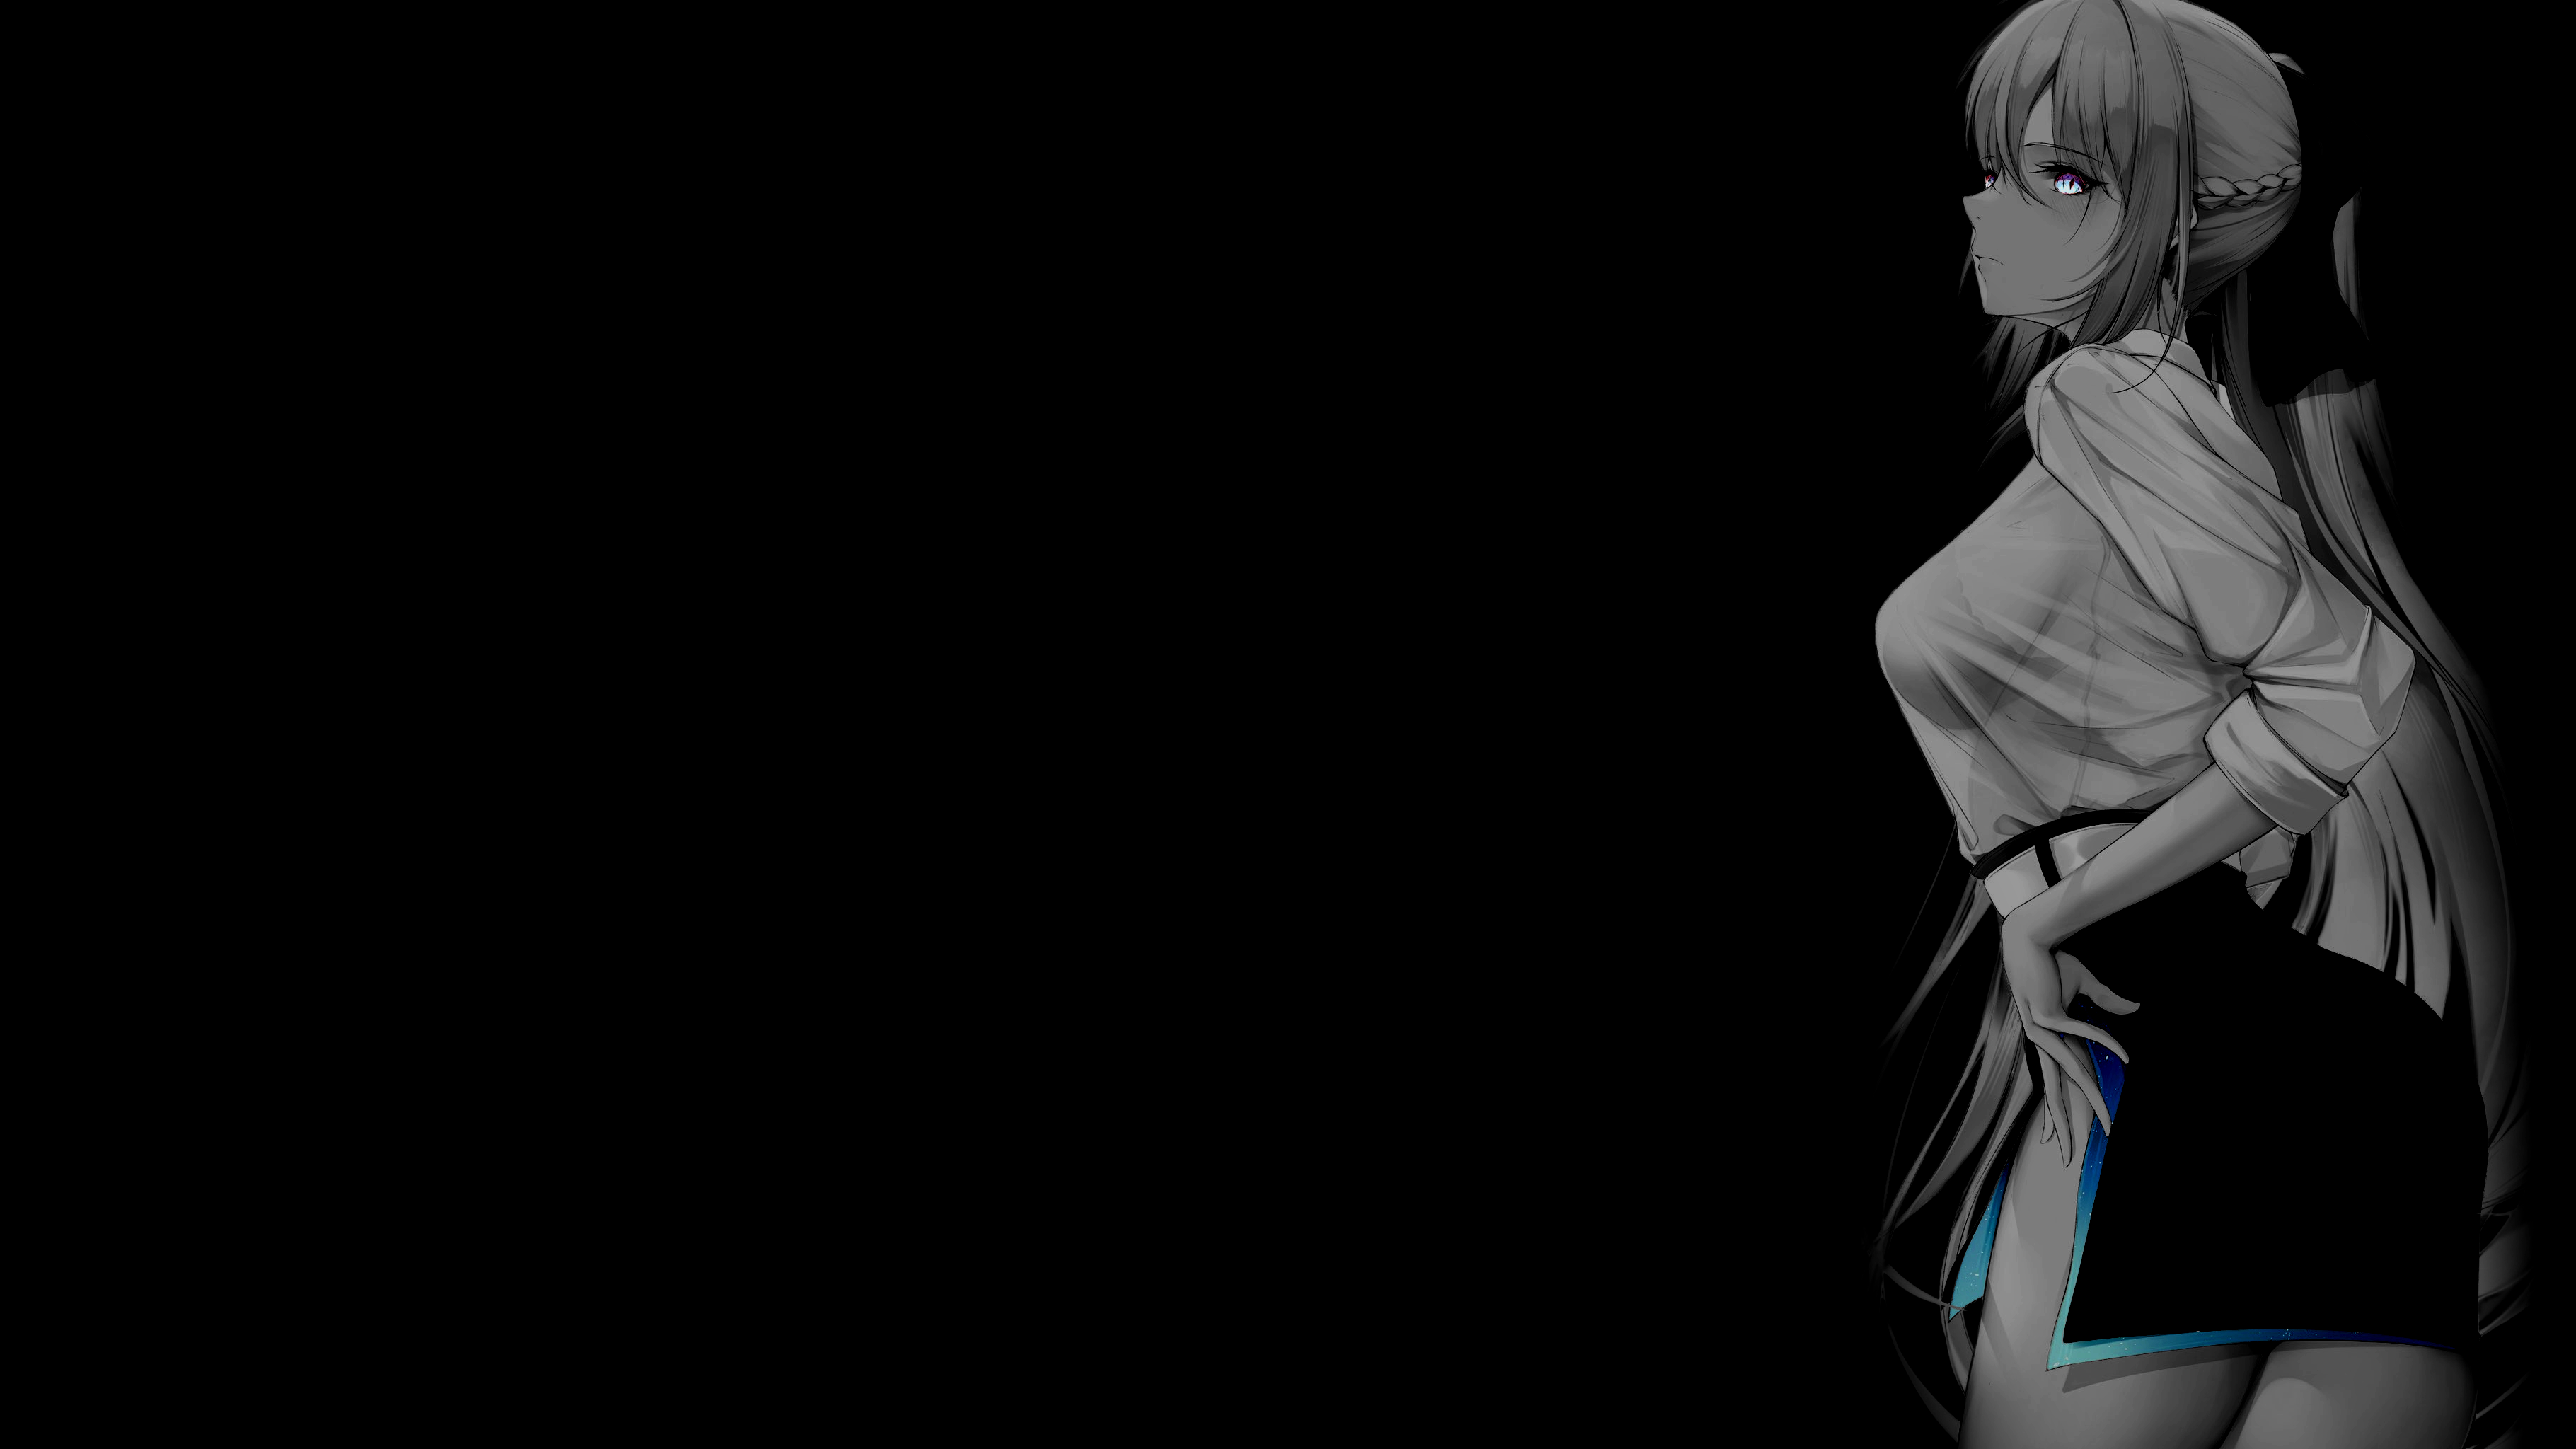 Anime 3641x2048 selective coloring black background dark background simple background anime girls Morgan le Fay